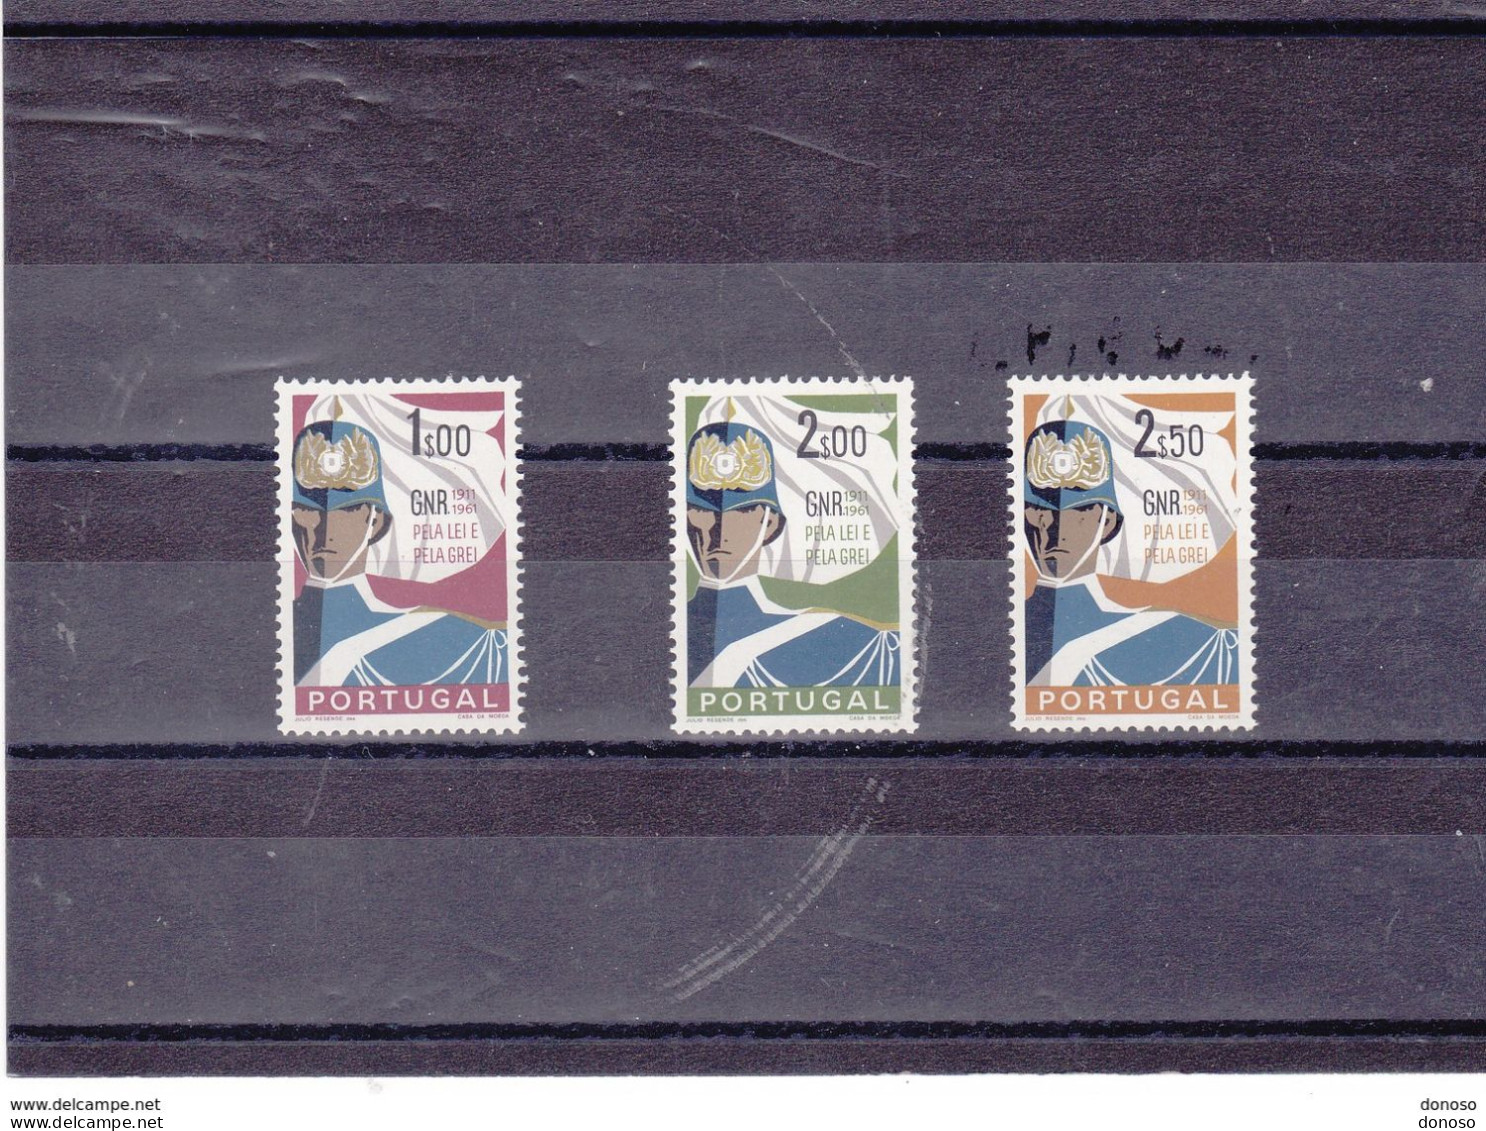 PORTUGAL 1962 GARDE NATIONALE Yvert 891-893, Michel 912-914 NEUF** MNH Cote:yv 5,50 Euros - Unused Stamps